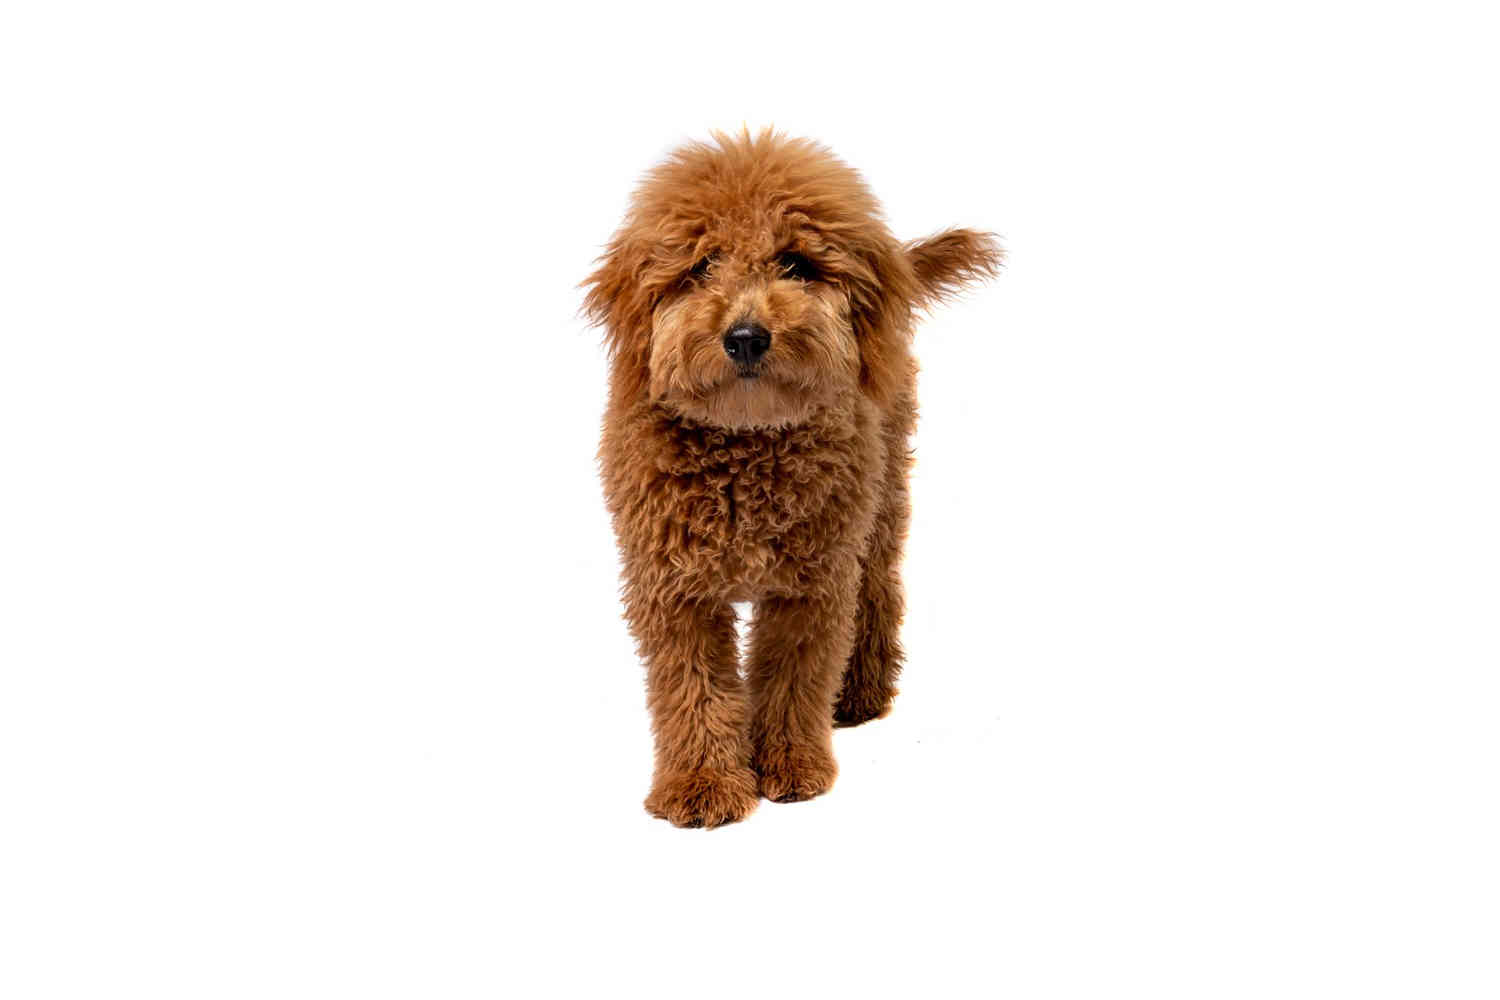 5 Effective Strategies for Managing Your Goldendoodle's Fear of Strangers